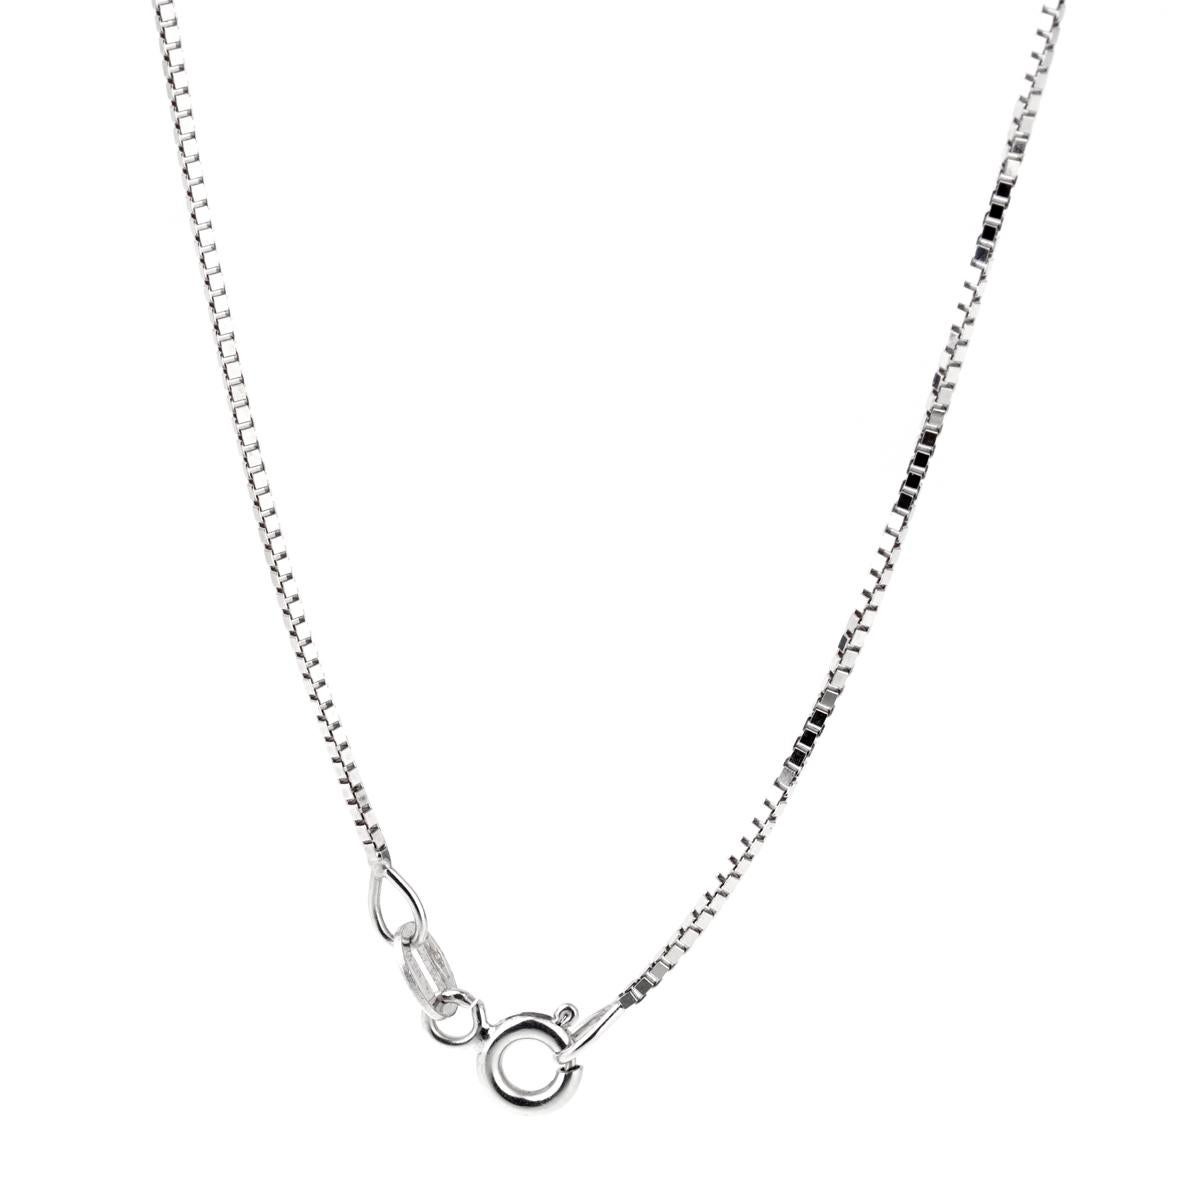 A chic Banco Oro line necklace featuring 5 round brilliant cut diamonds set in 18k white gold. Necklace length 16